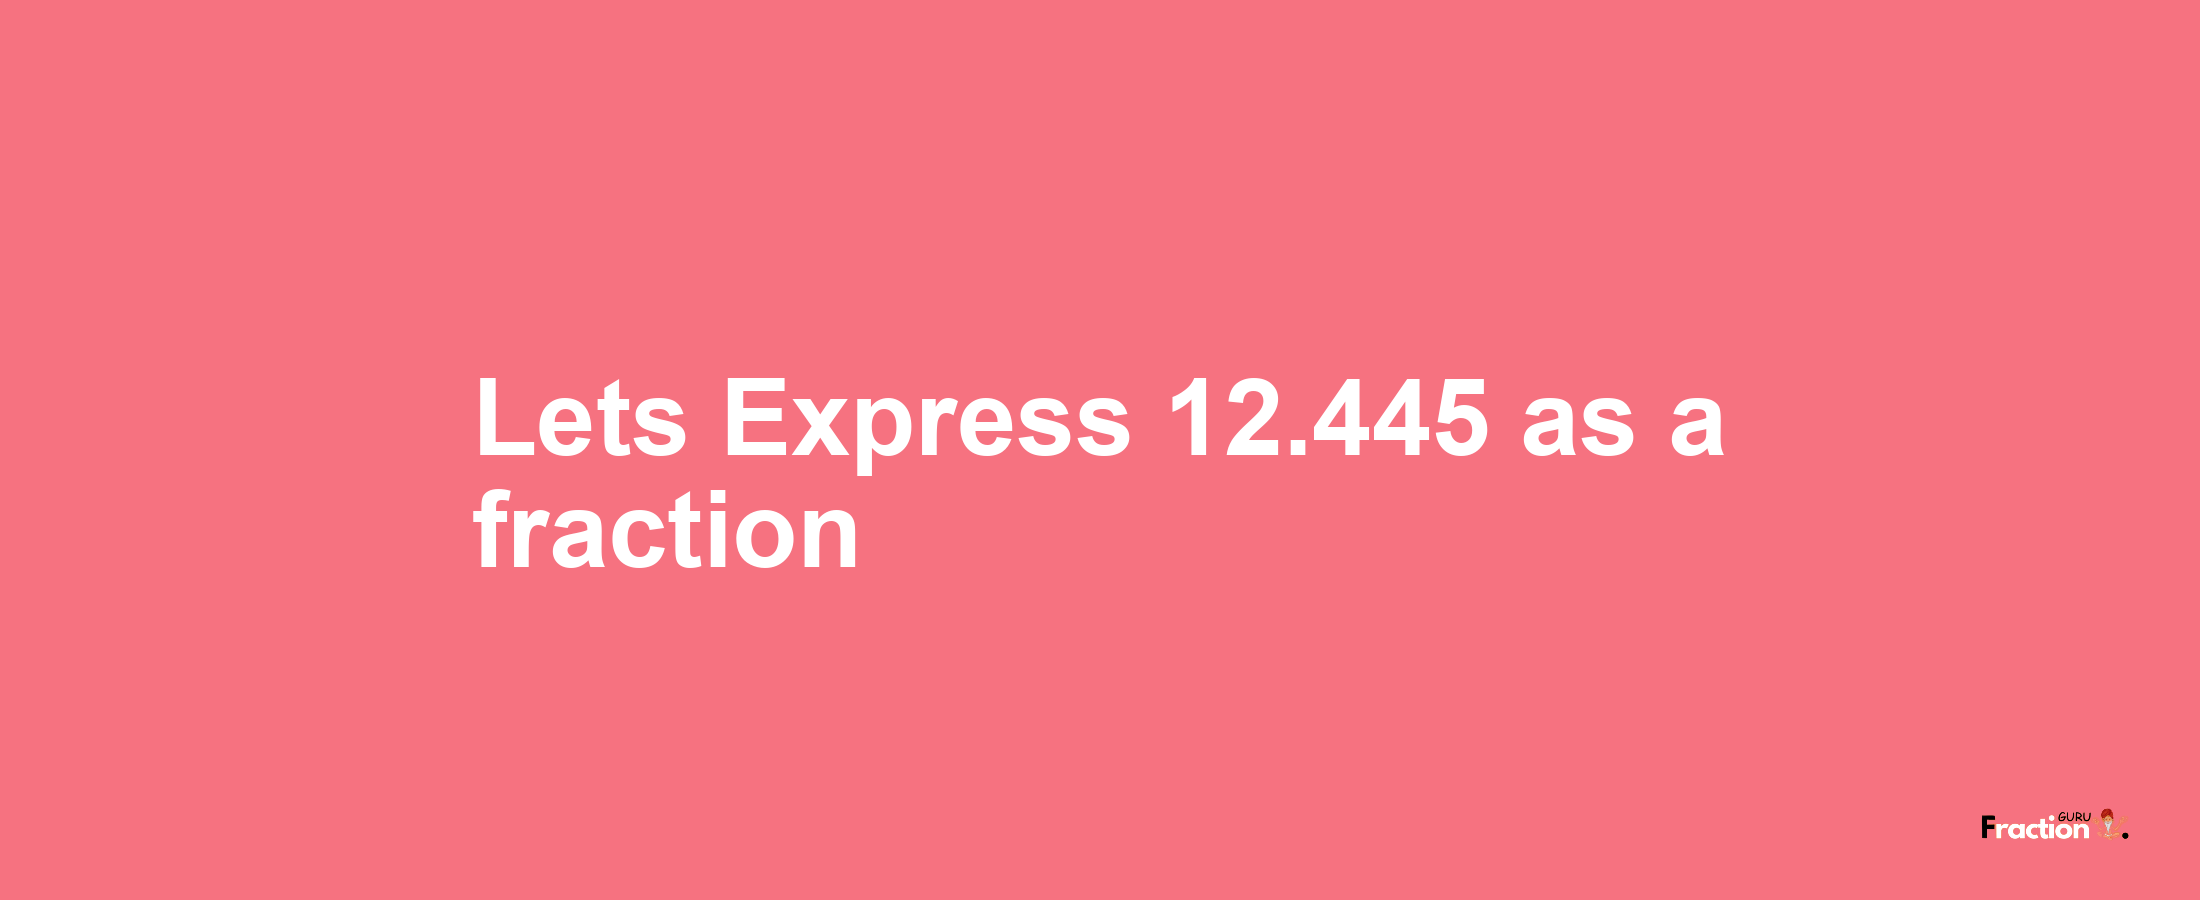 Lets Express 12.445 as afraction